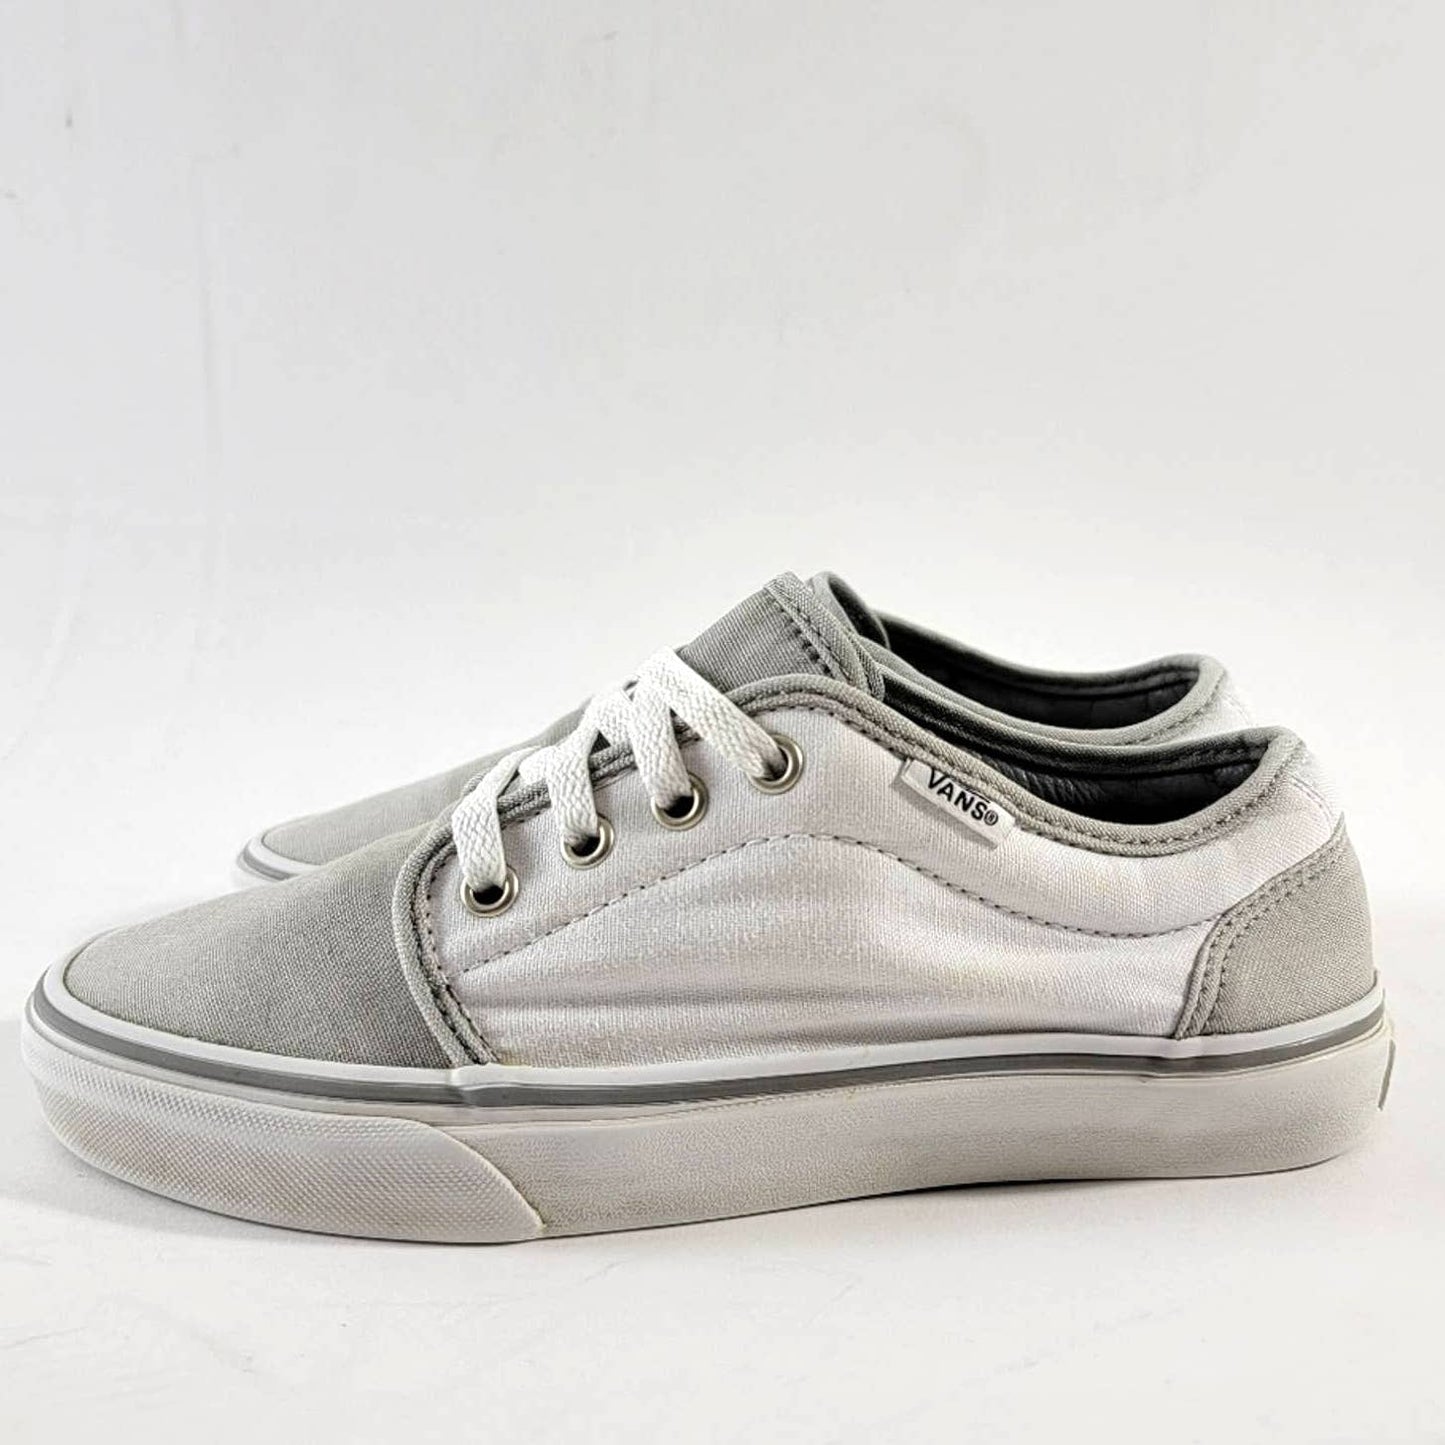 Vans Atwood Classic Two Tone Low Top Sneakers - 7.5